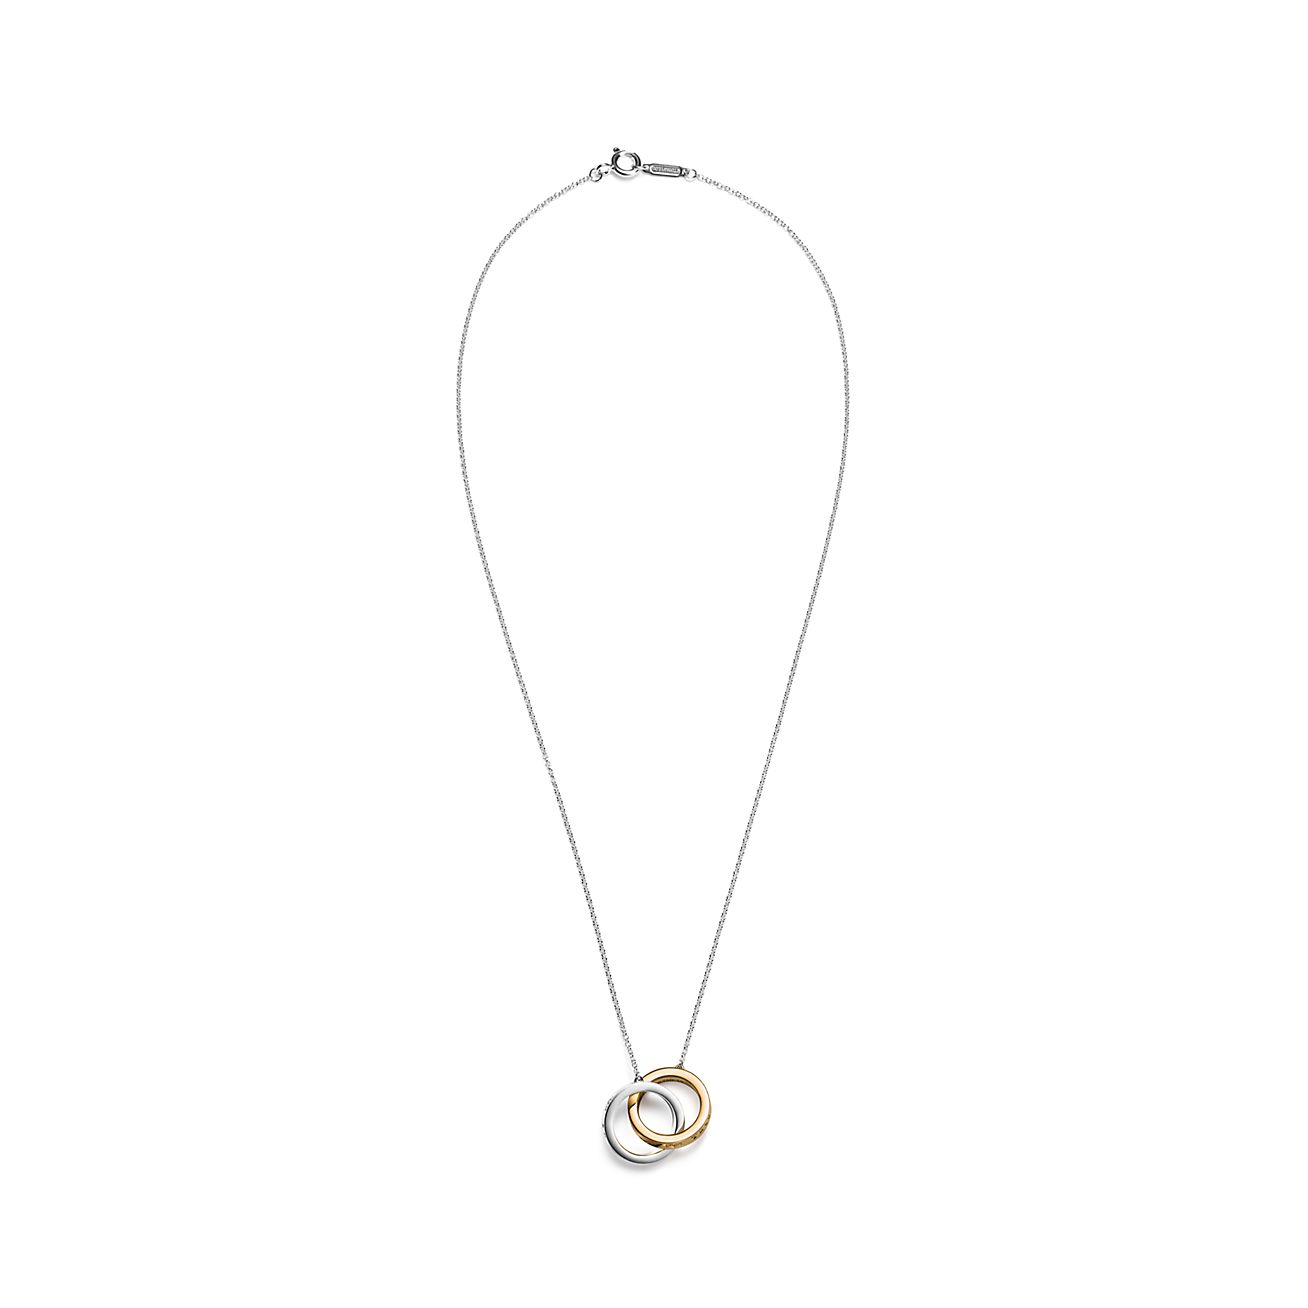 Tiffany & Co. Interlocking Circles Pendant Necklace | Rent Tiffany & Co.  jewelry for $55/month